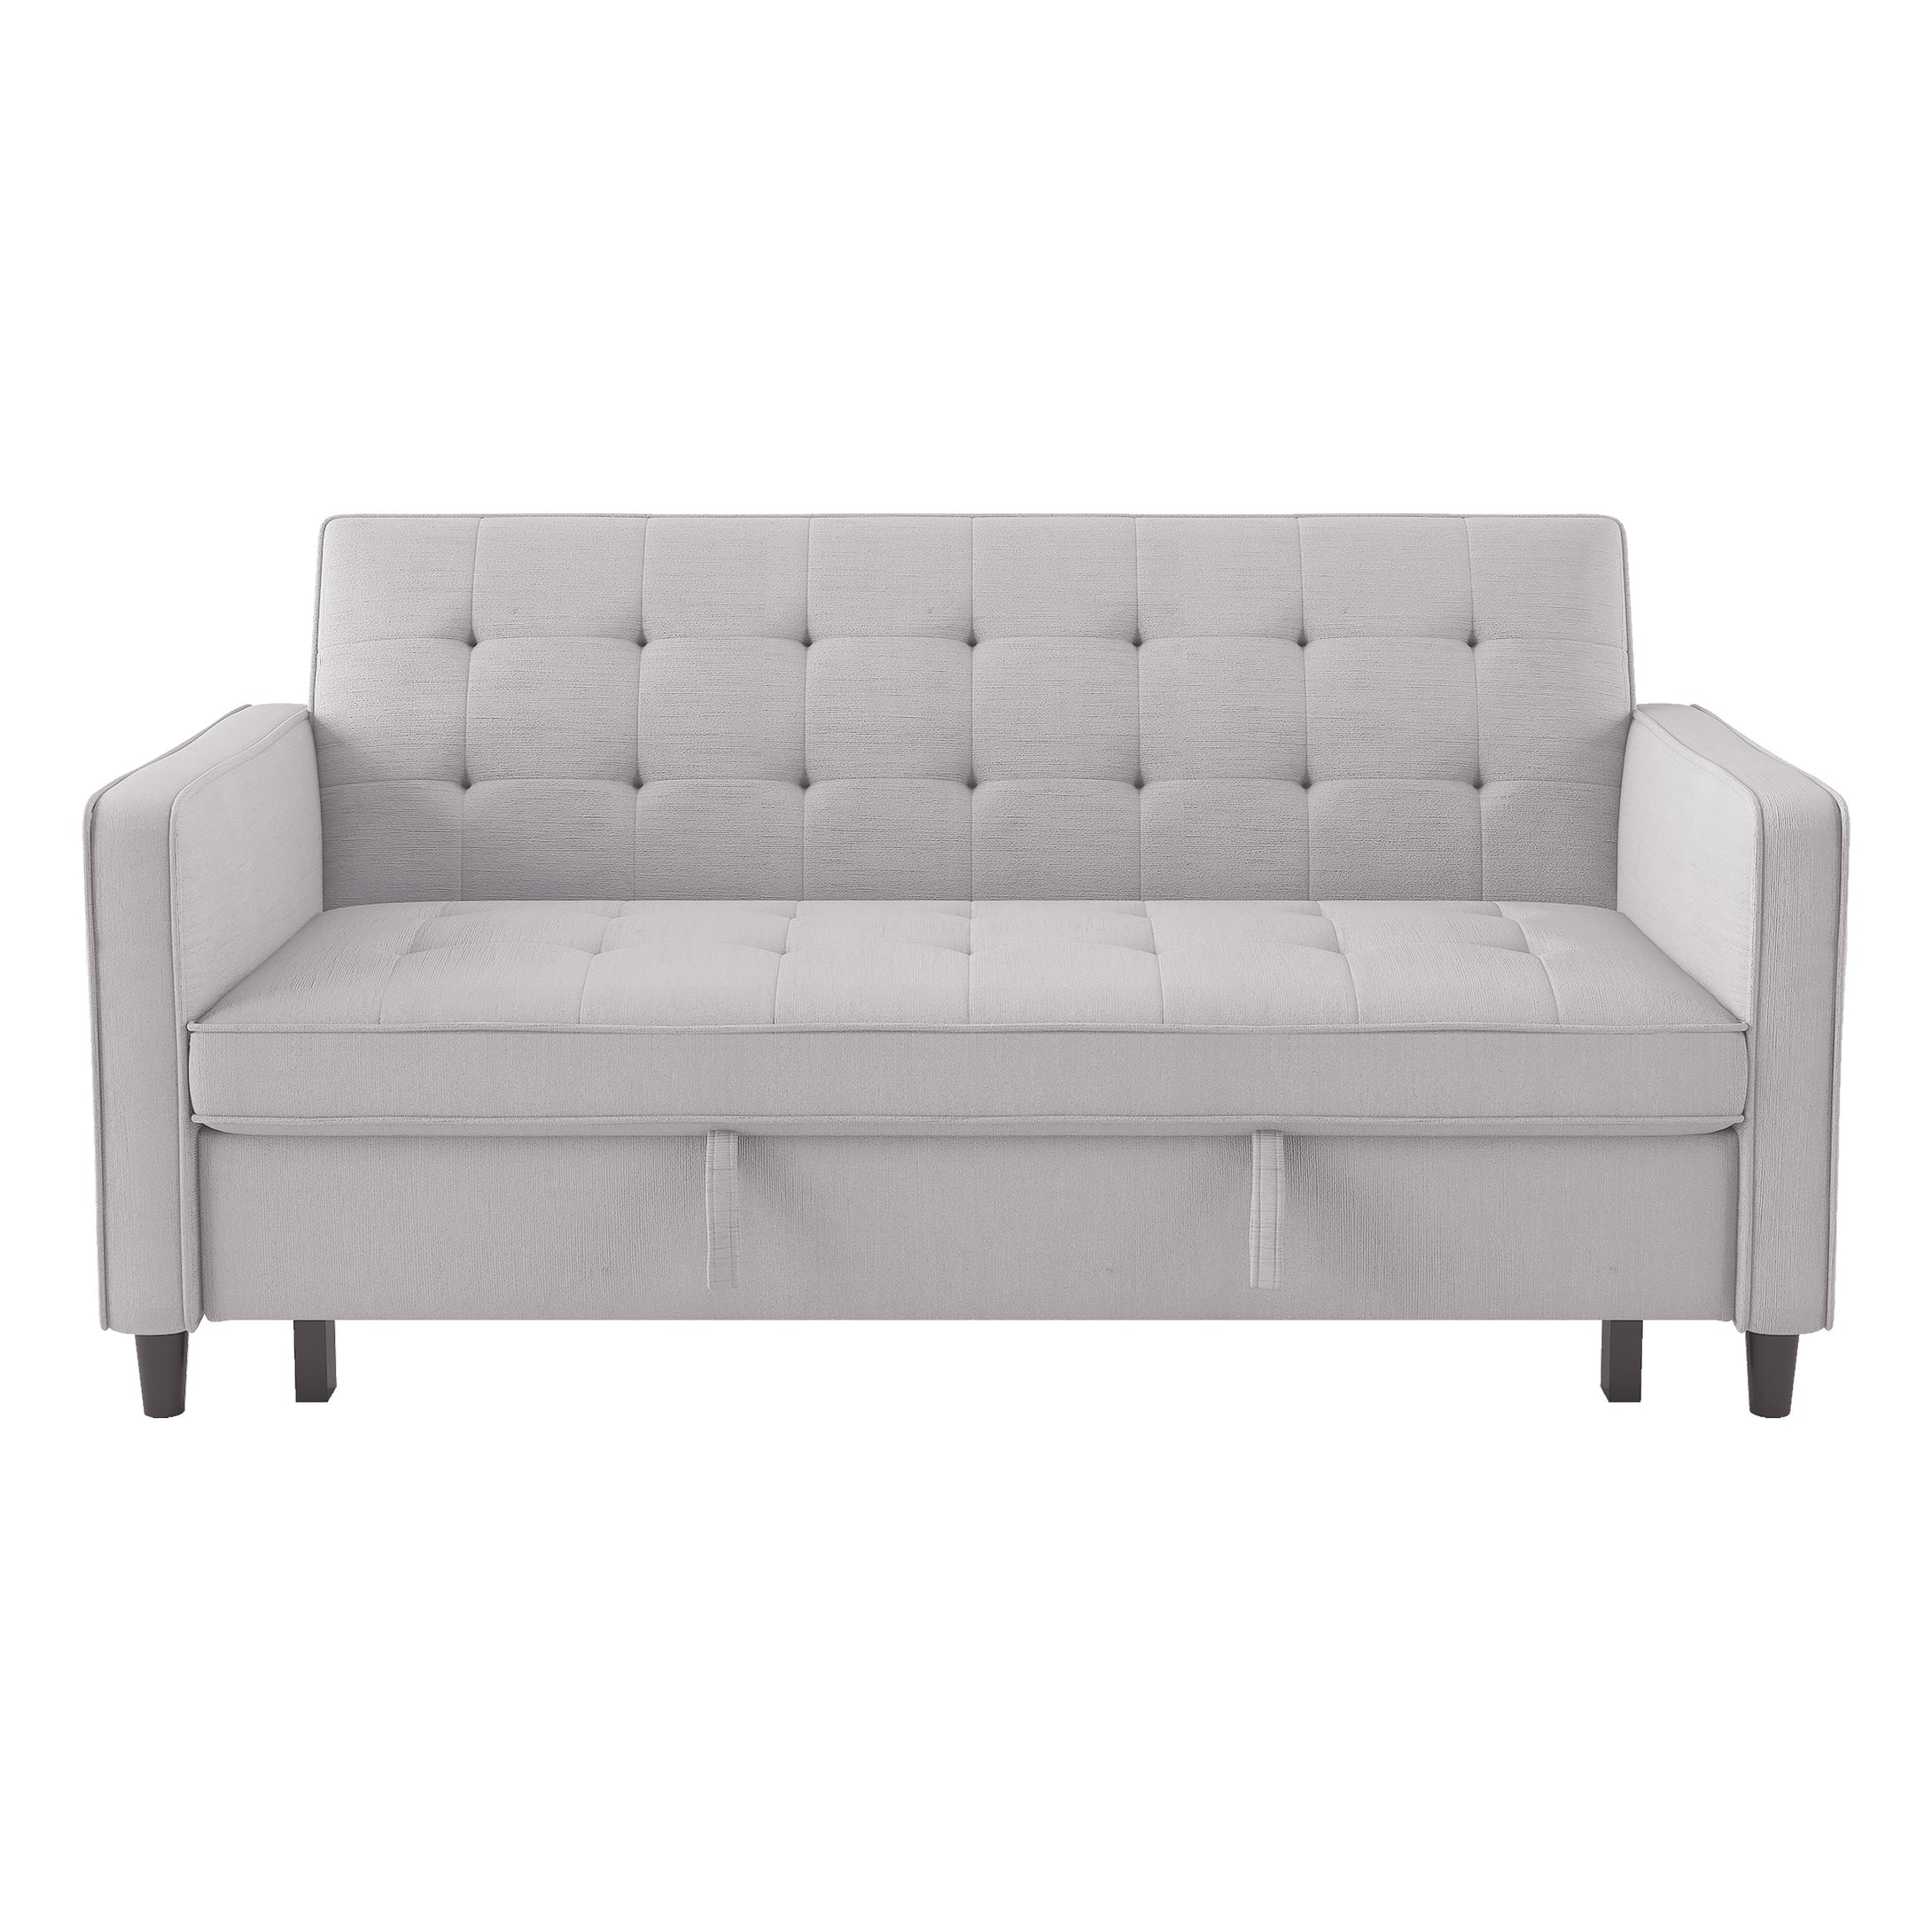 9427DV-3CL Convertible Studio Sofa with Pull-out Bed